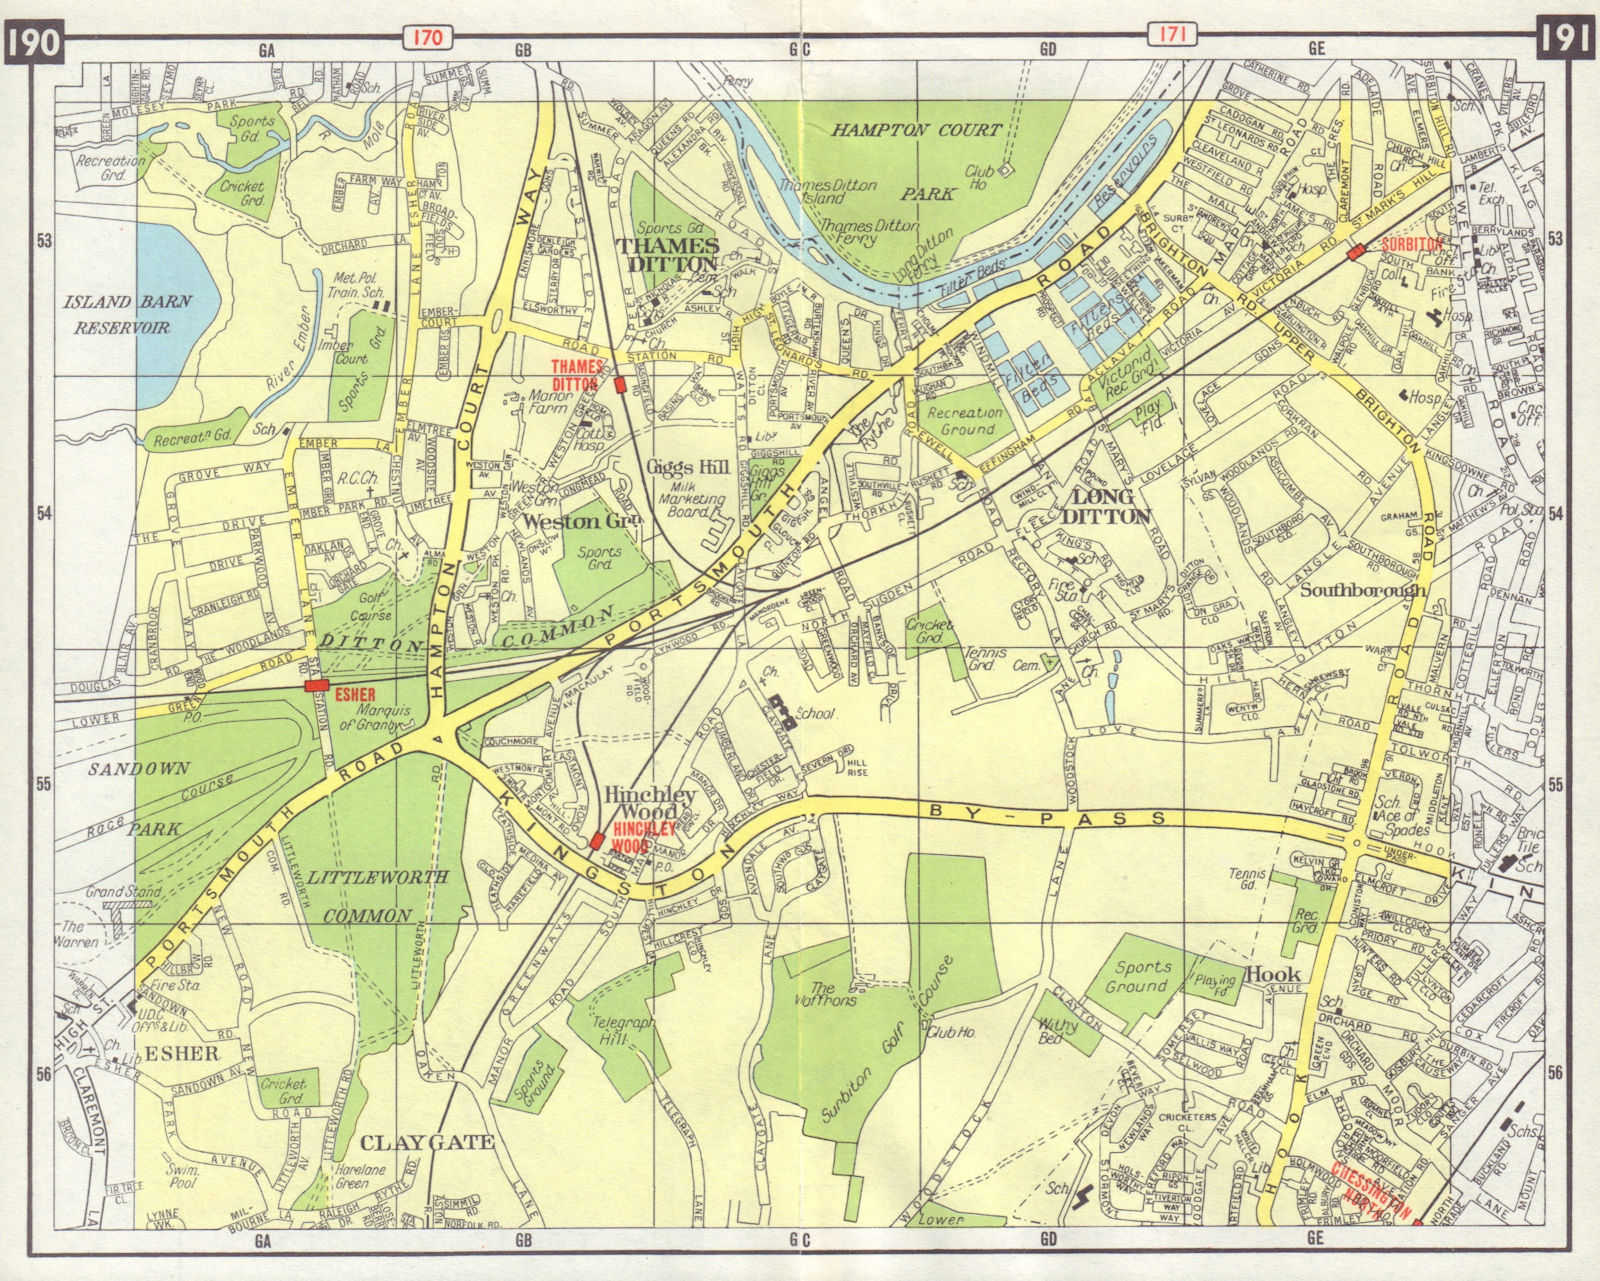 SW LONDON Long/Thames Ditton Hook Hinchley Wood Claygate Esher Surbiton 1965 map